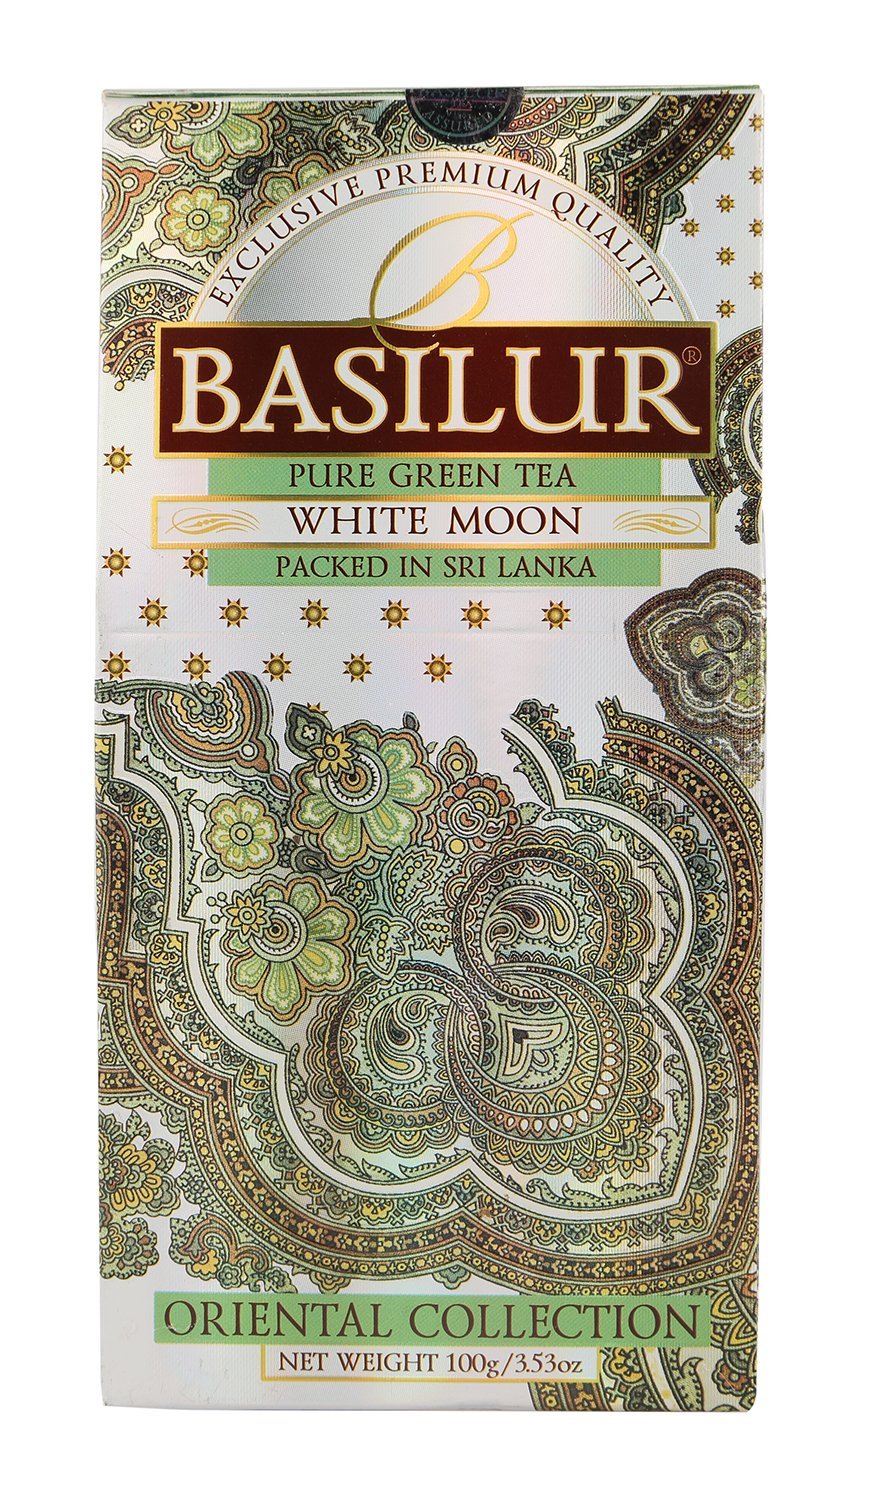 Basilur Milk Oolong Chinese Green Leaf Tea "White Moon" Oriental Collection 100g - $16.32